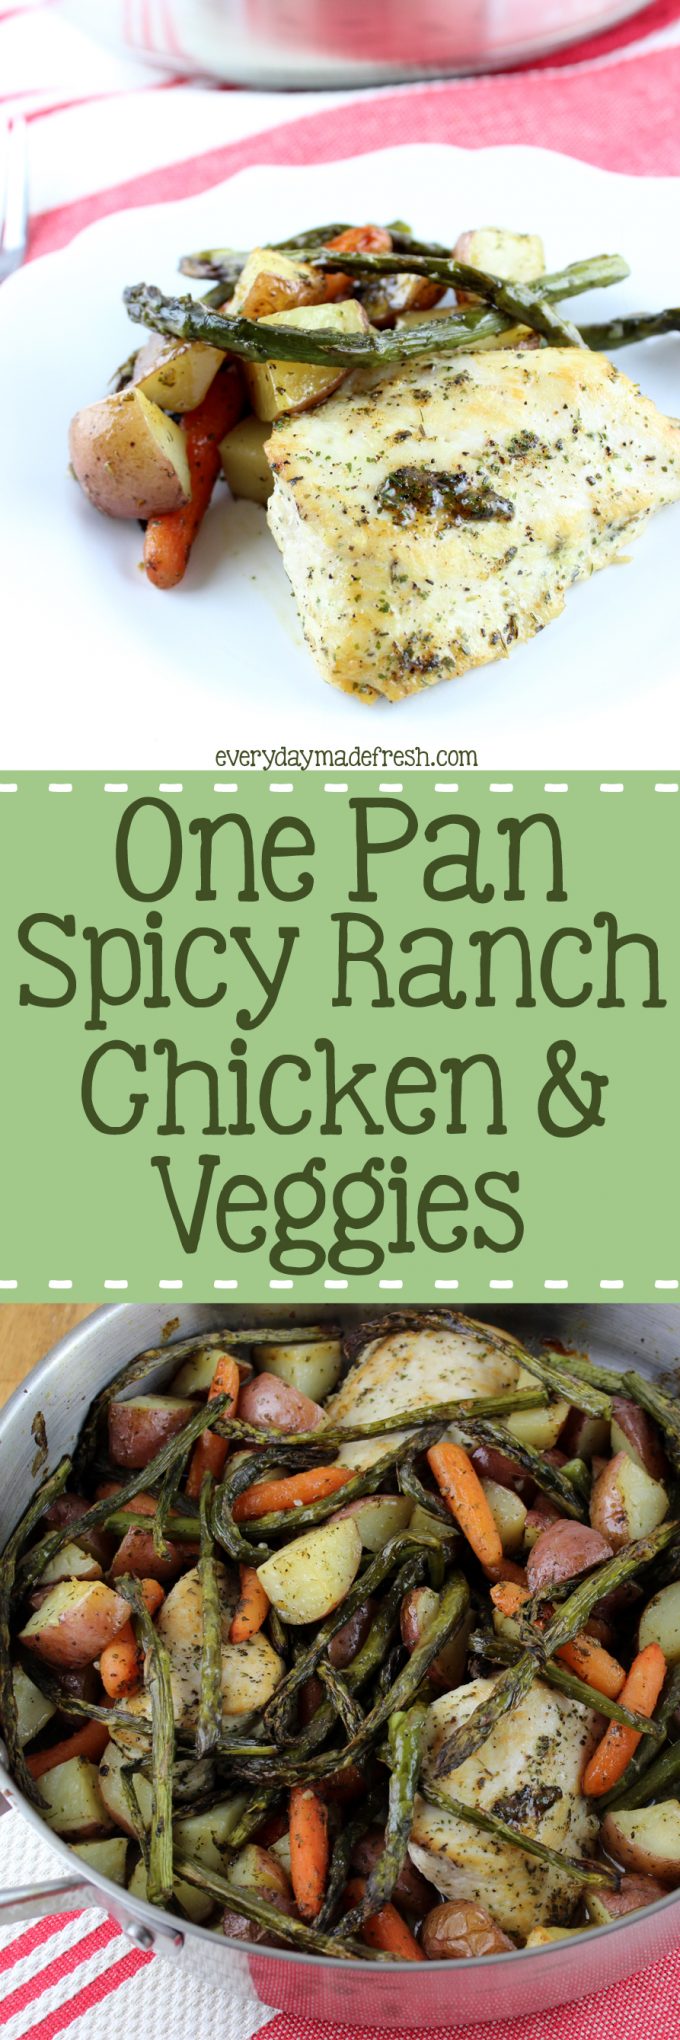 This One Pan Spicy Ranch Chicken & Veggies is loaded with flavor! Chicken, asparagus, carrots, and potatoes come together with a few seasonings to create the perfect dinner. | EverydayMadeFresh.com